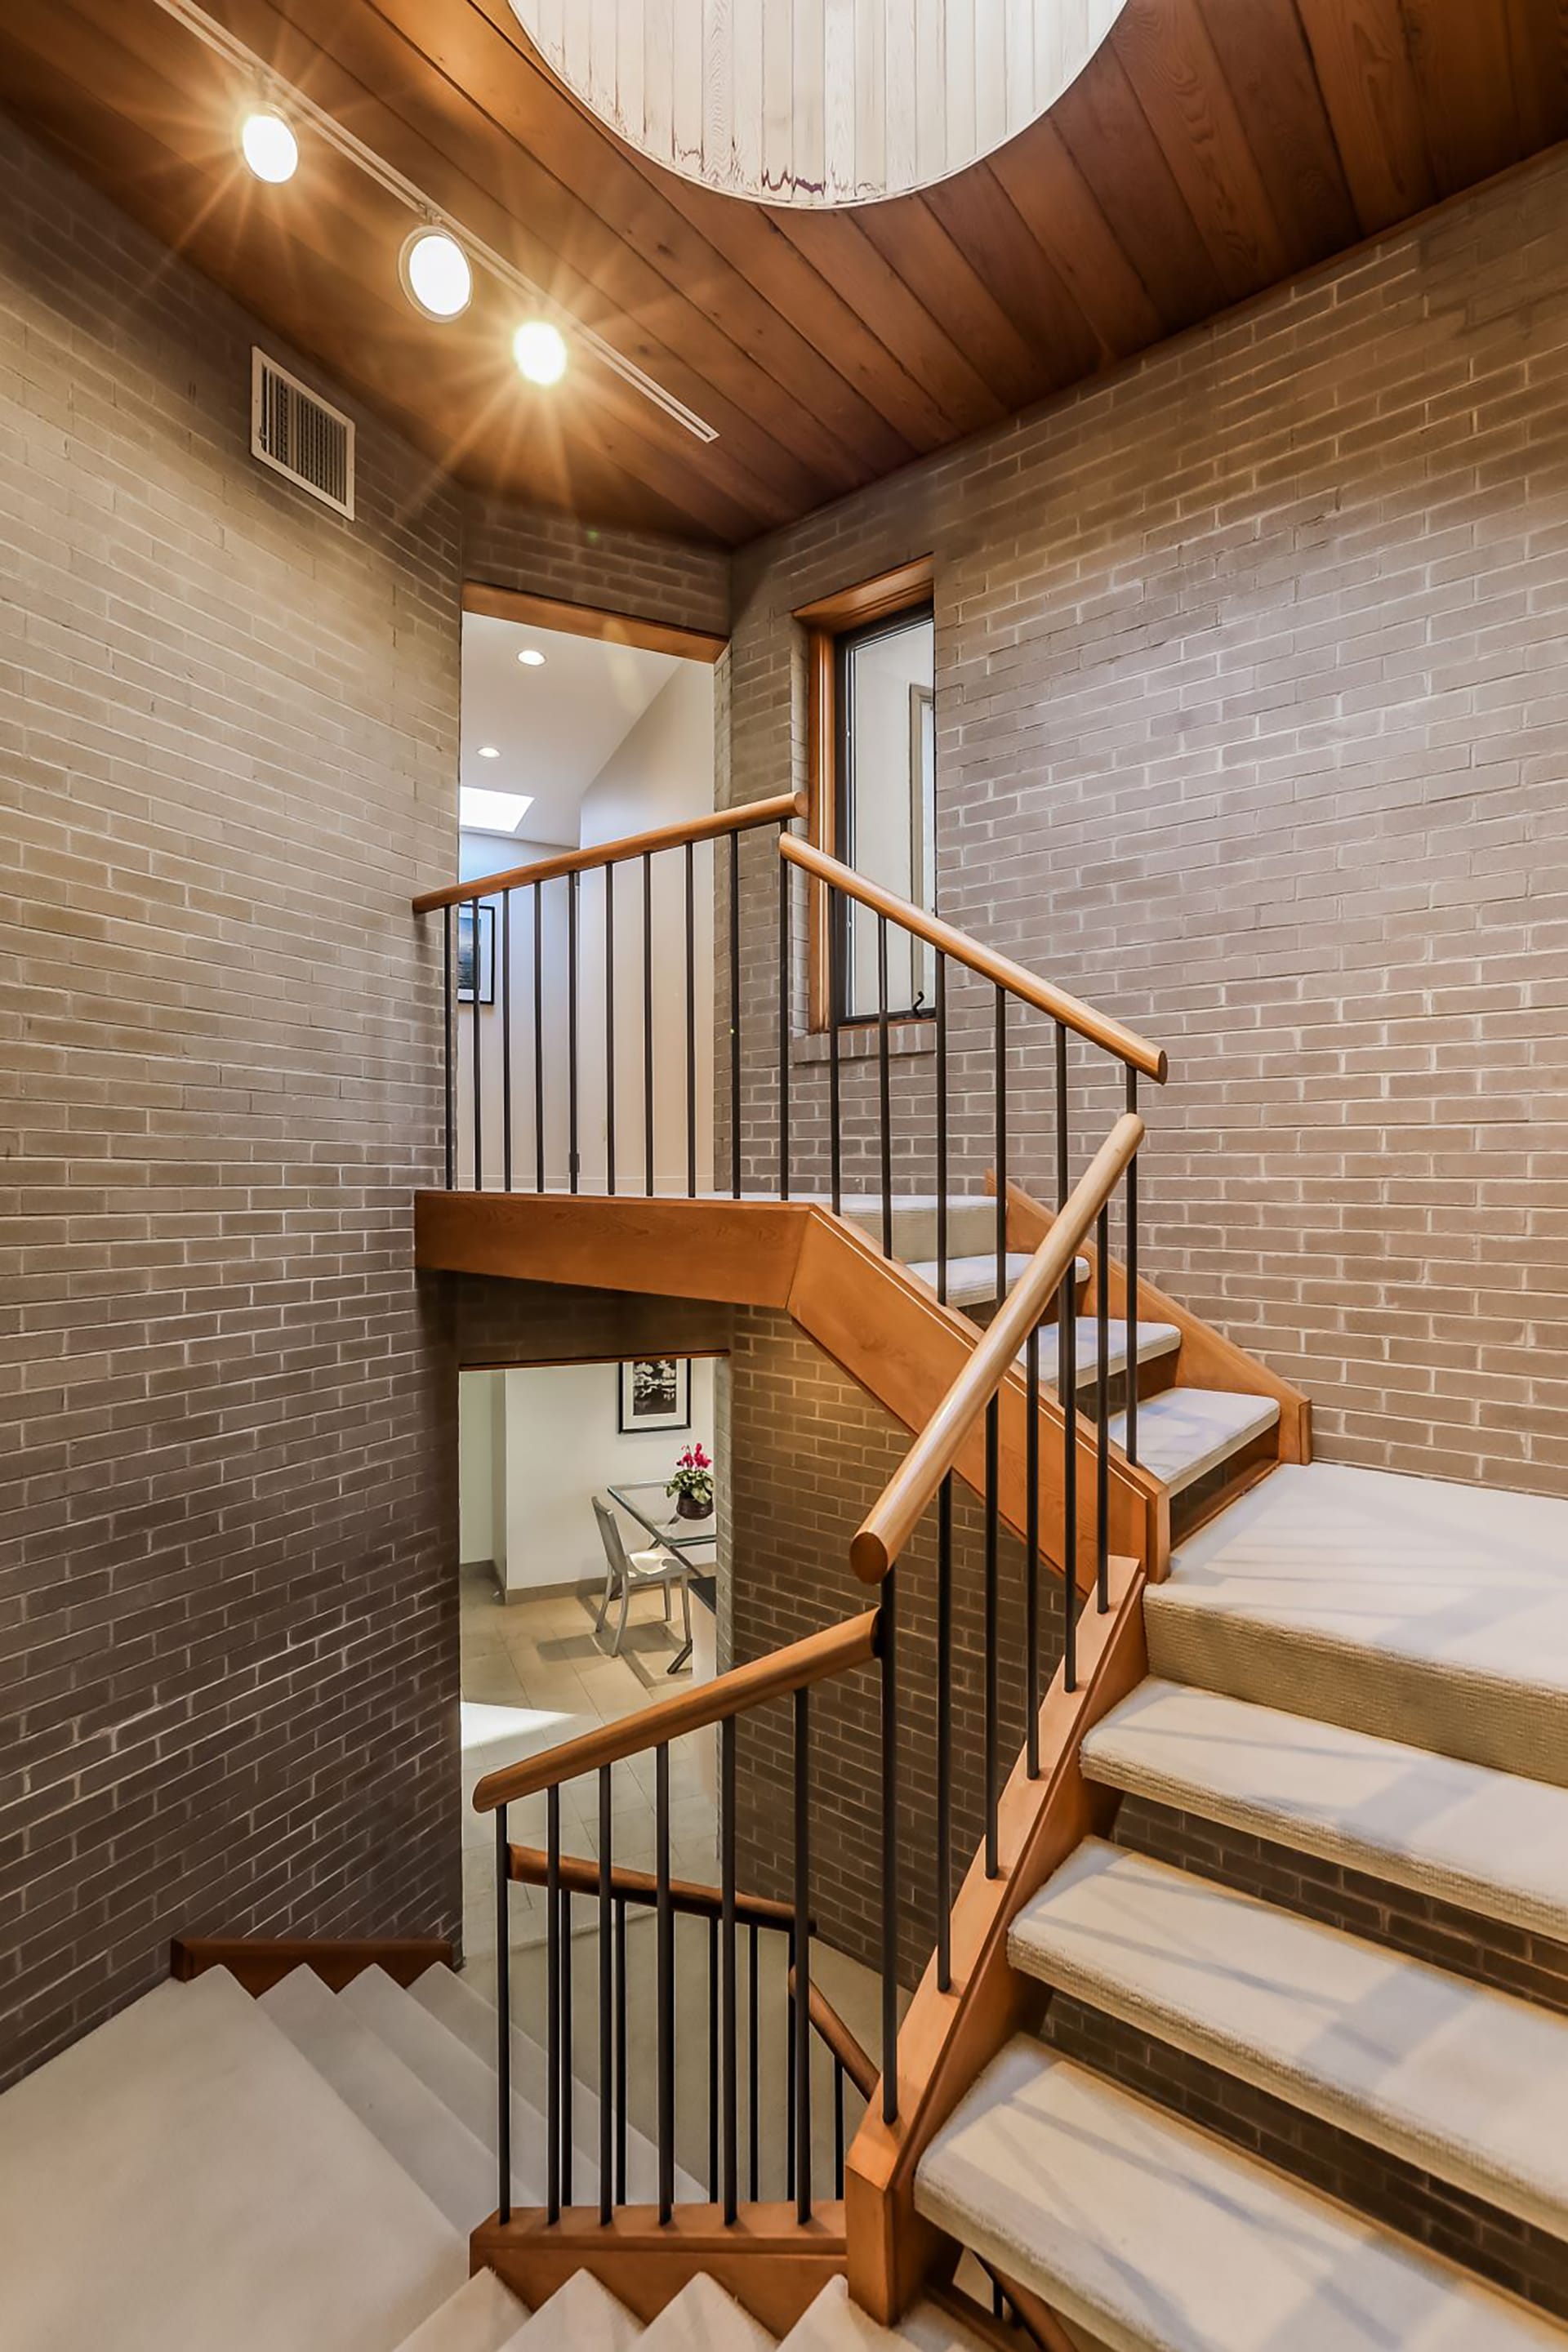 Open riser, open stringer staircase with brick walls, a skylight, and wood paneled ceilings